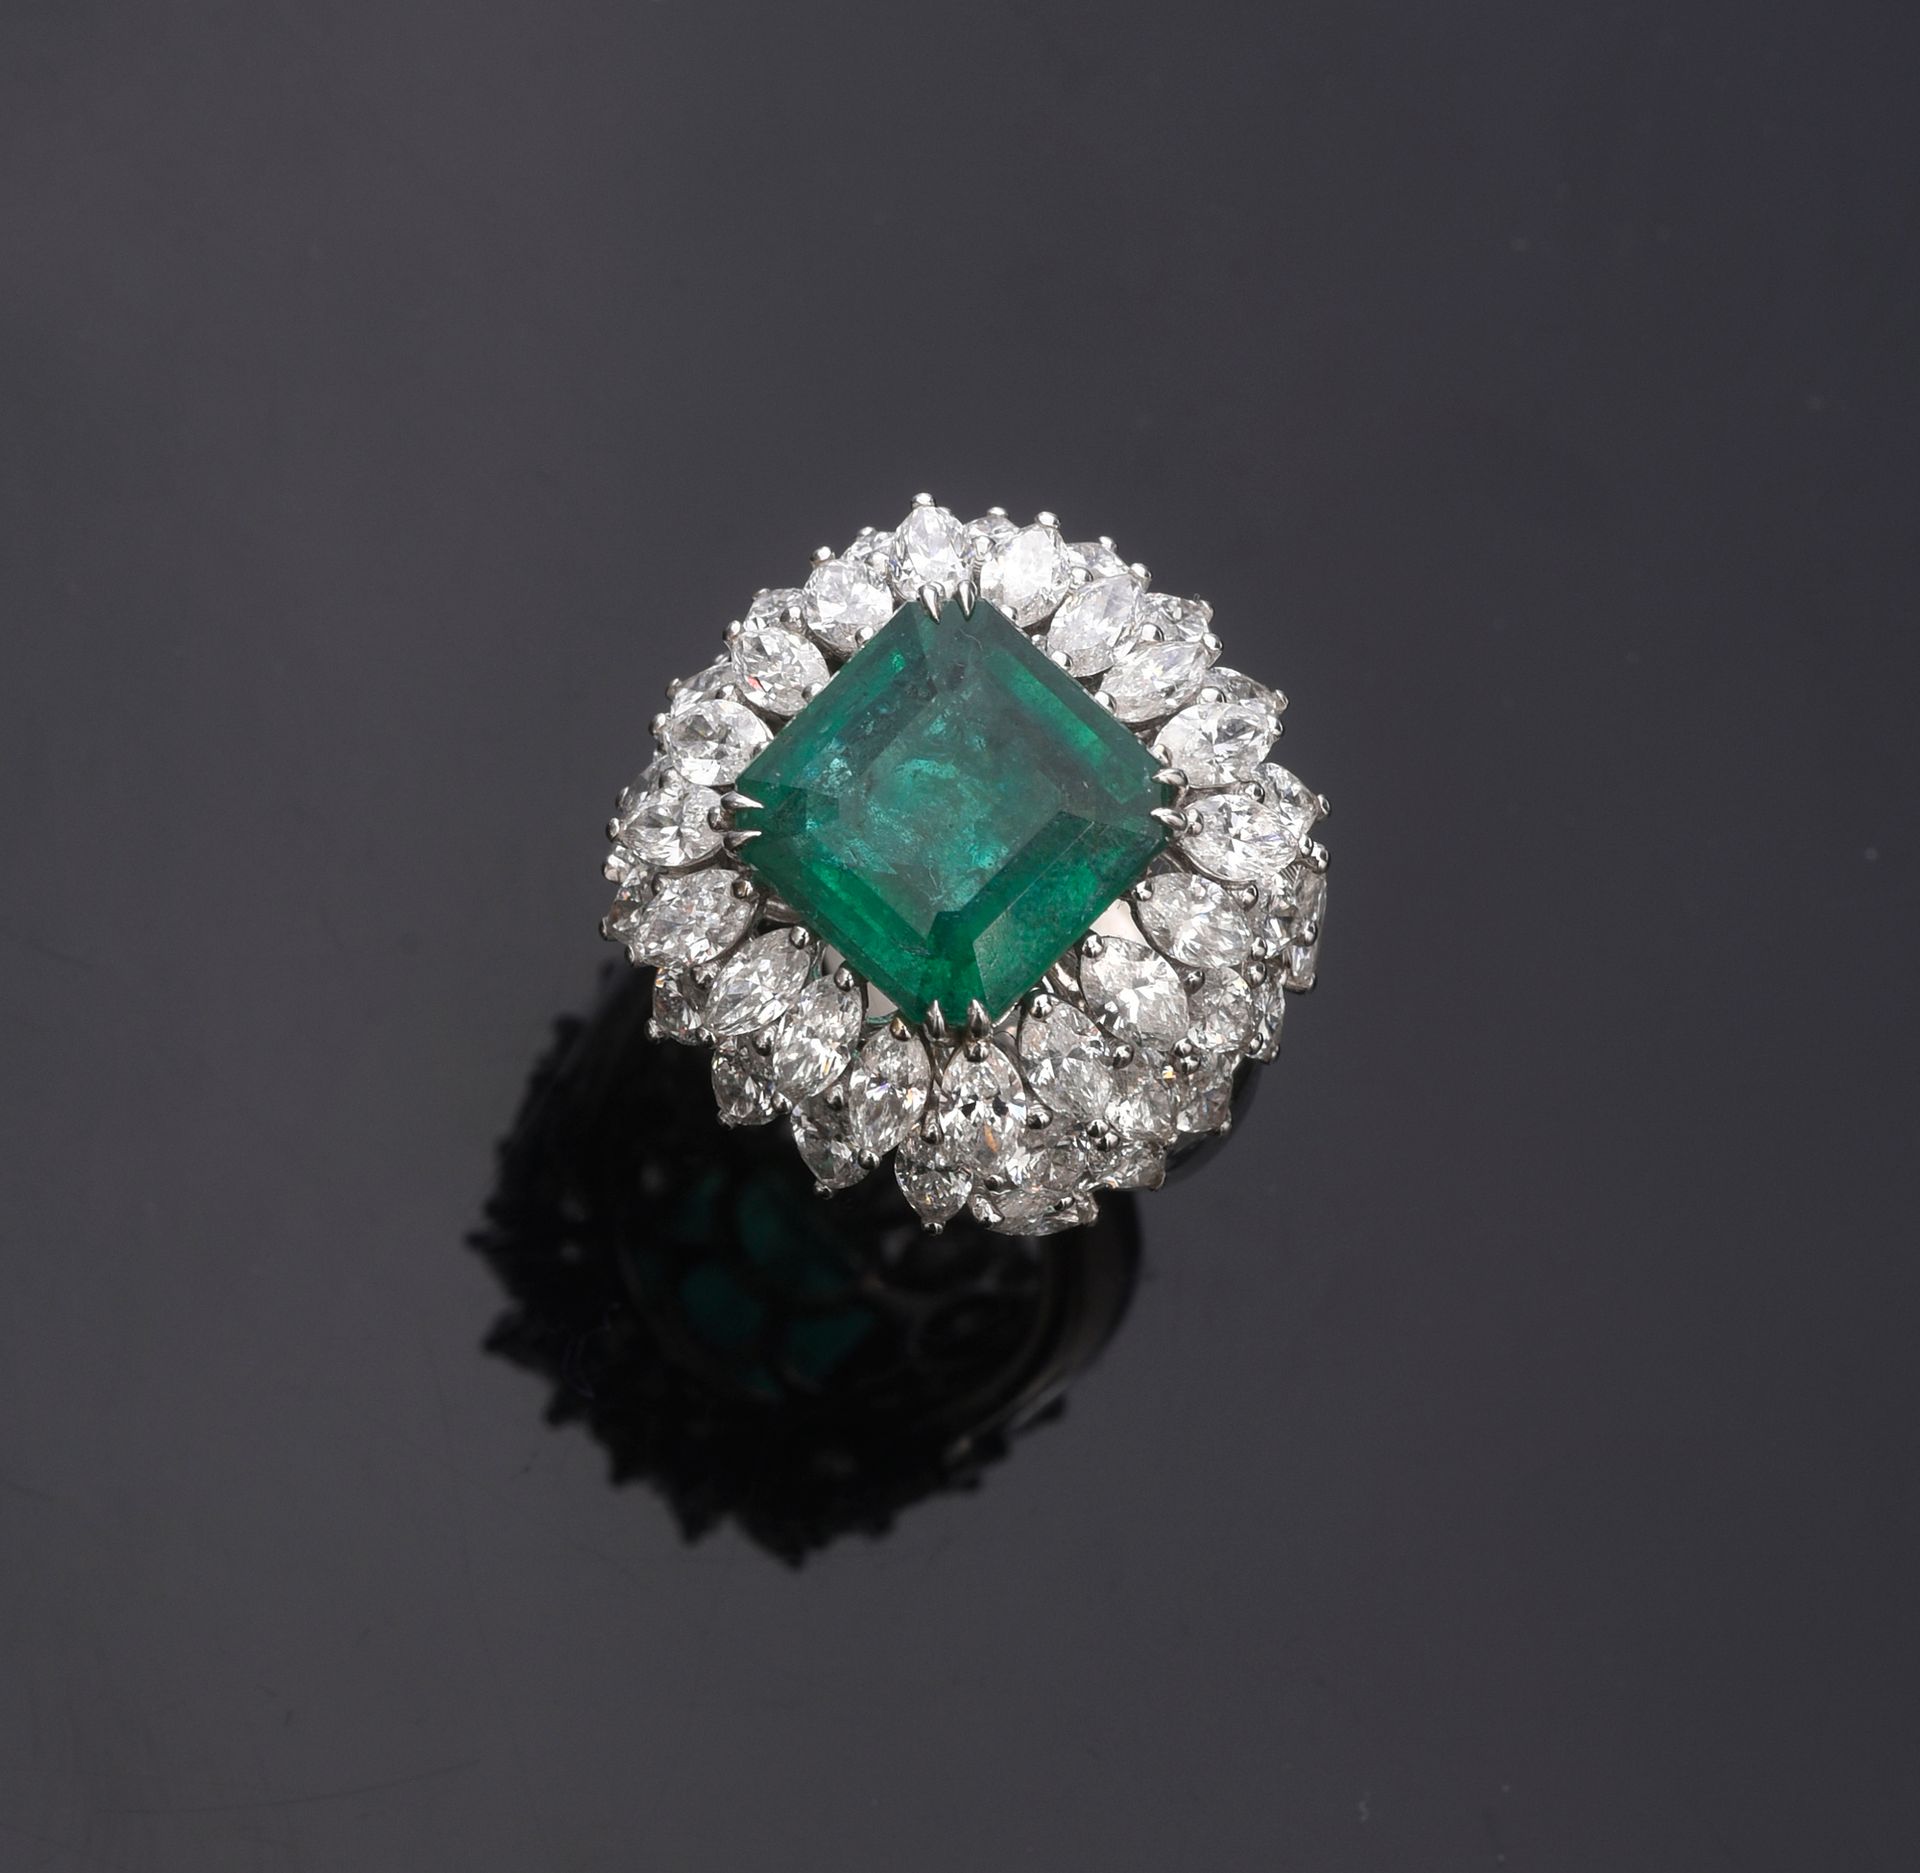 Null Ring in 750th white gold, set with a square cut Zambian emerald (6.58 ct), &hellip;